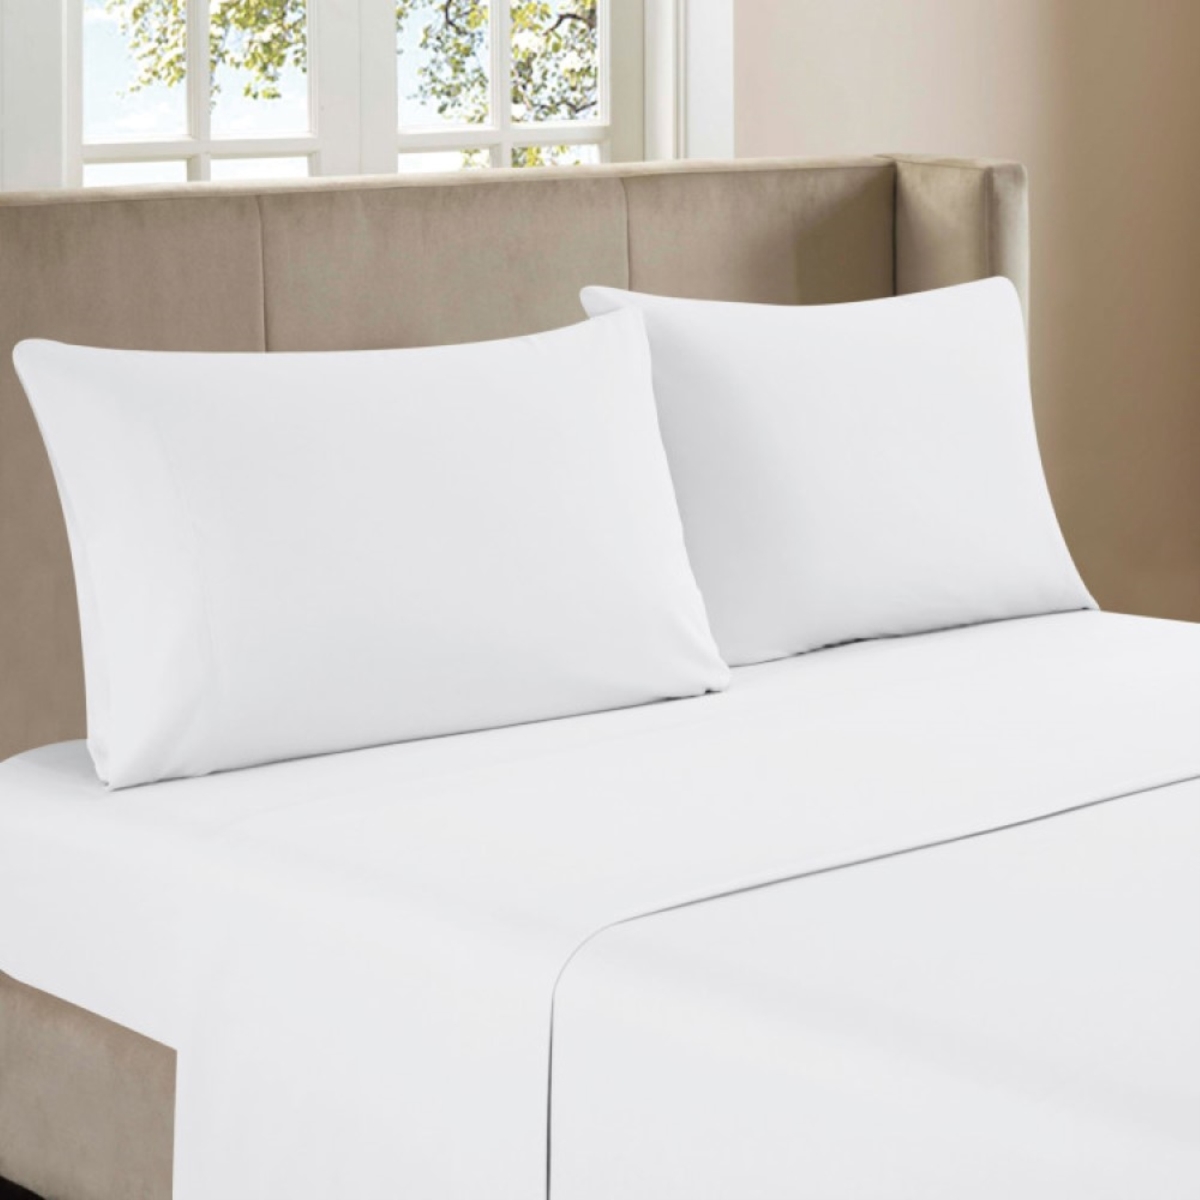 Whtx603-whq Bamboo Sheet Set, Solid White - Queen Size - 4 Piece